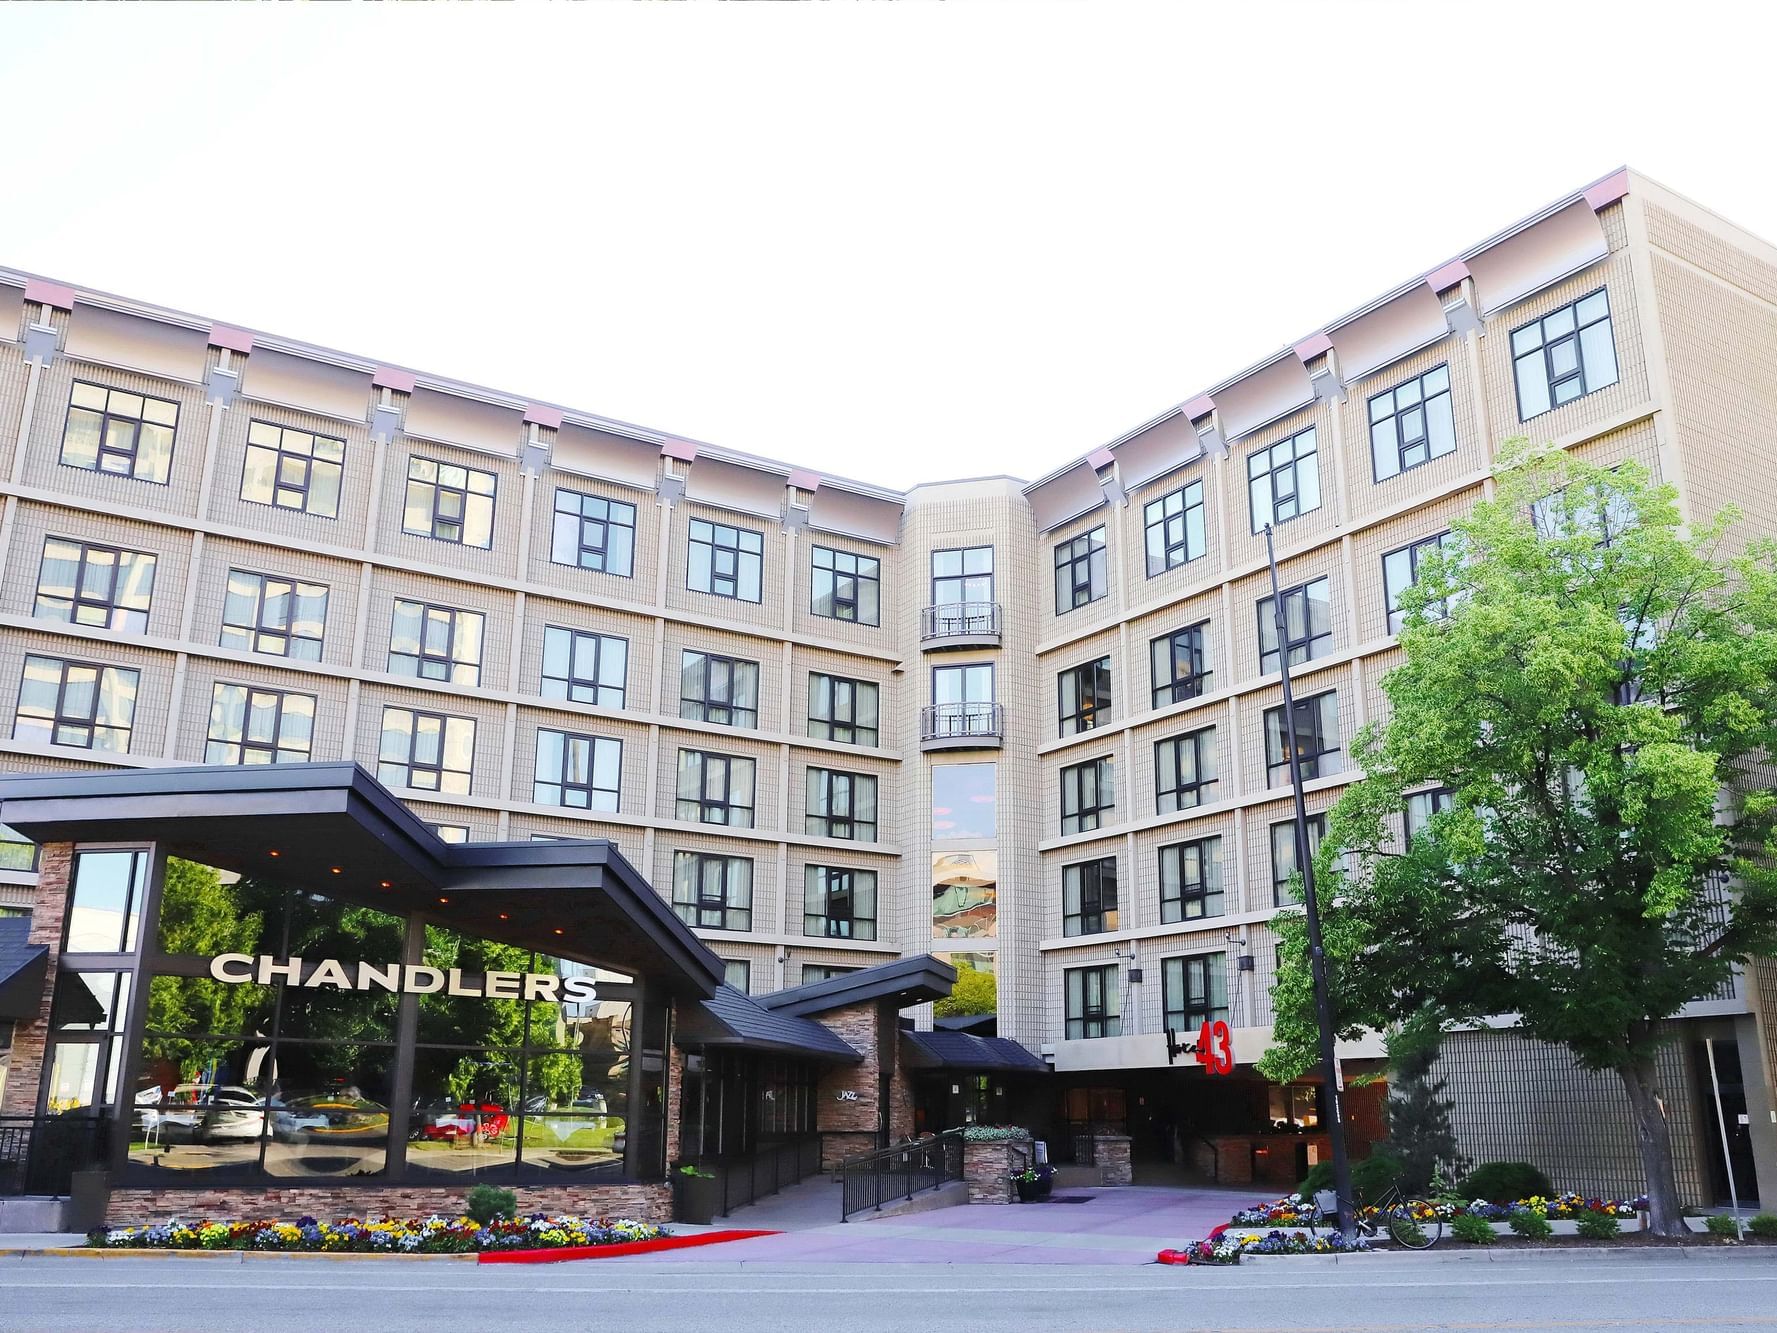 Exterior of the Chandlers near The Grove Hotel